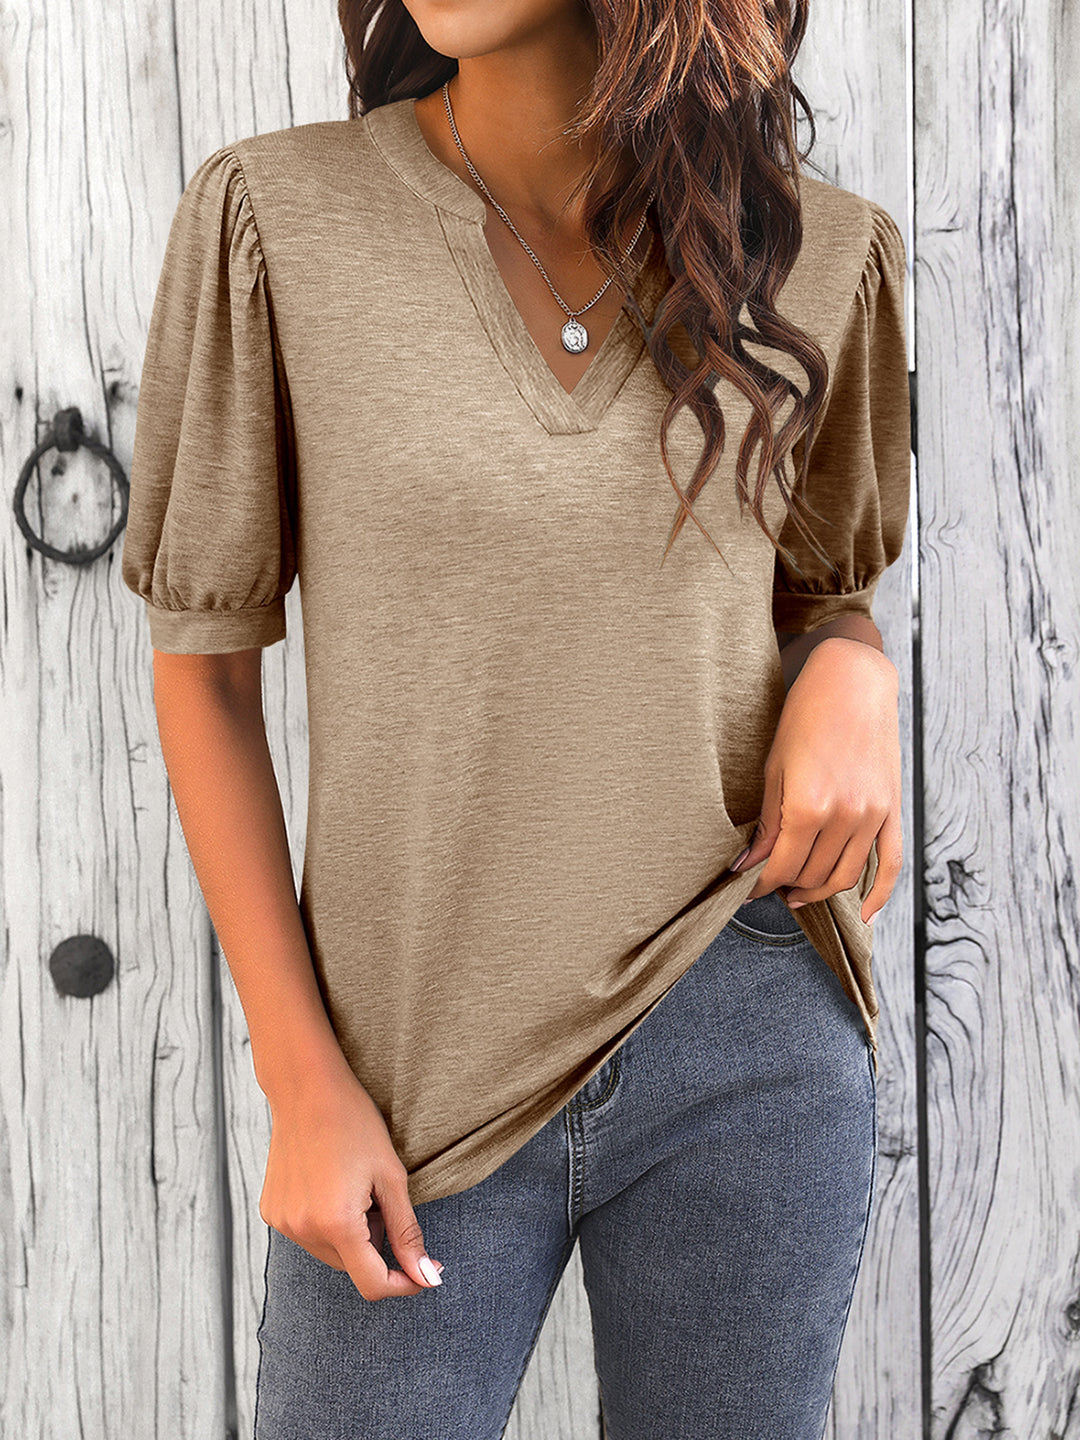 Womens V Neck T Shirts Casual Puff Short Sleeve Loose Summer Blouses Tops